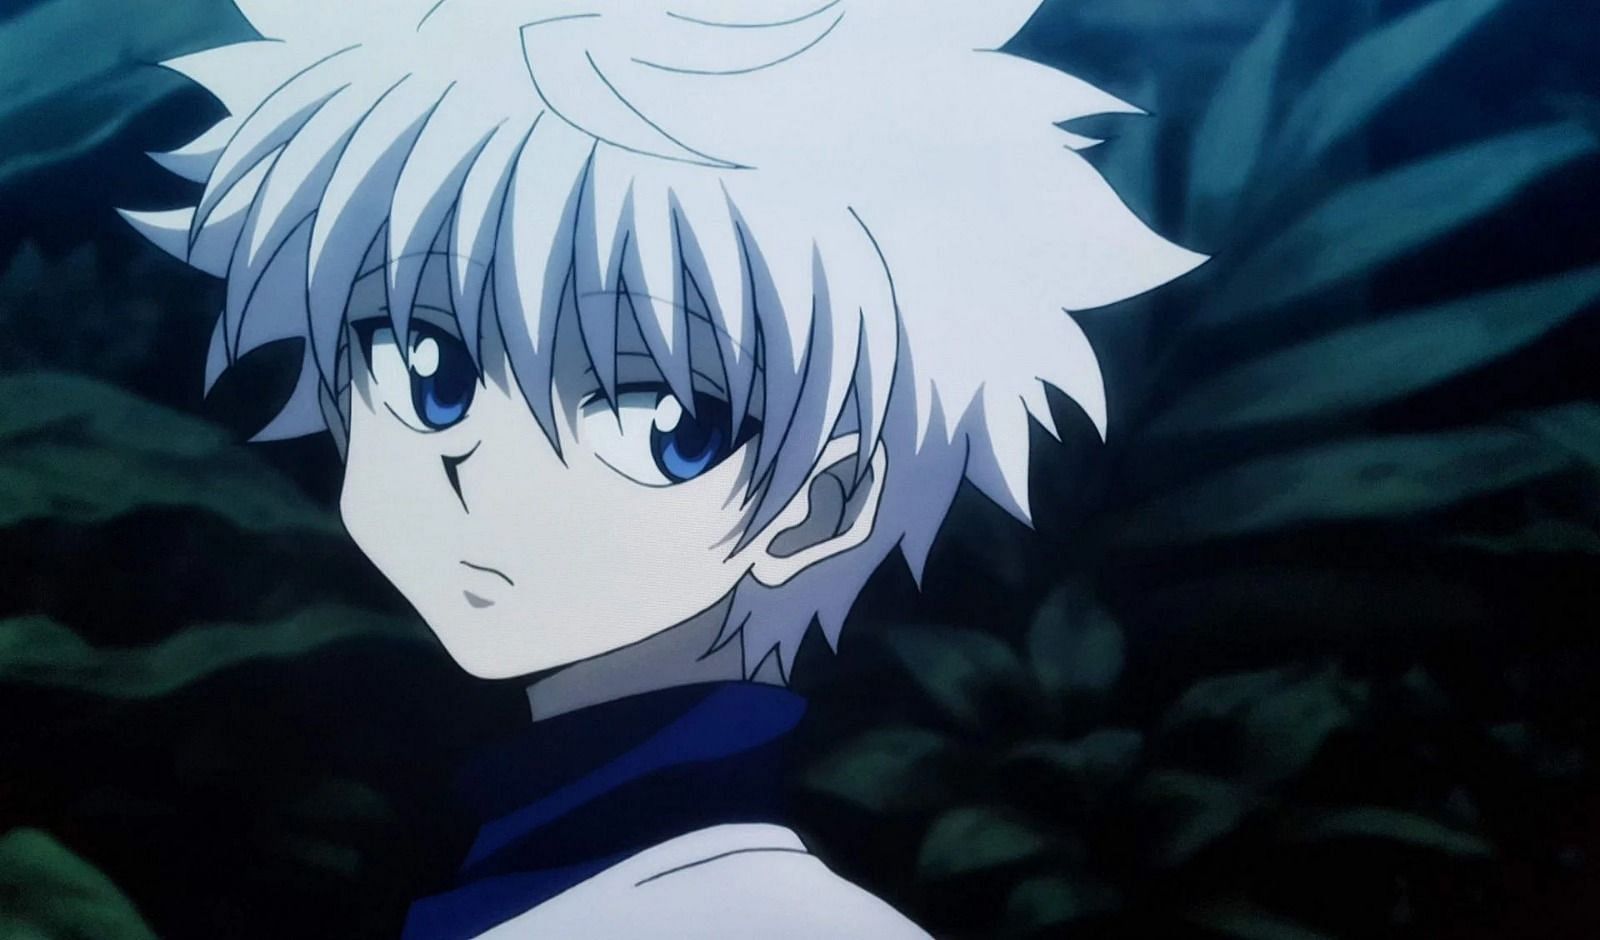 Killua is an anime side character who is more famous than the main characters. (image via Madhouse)